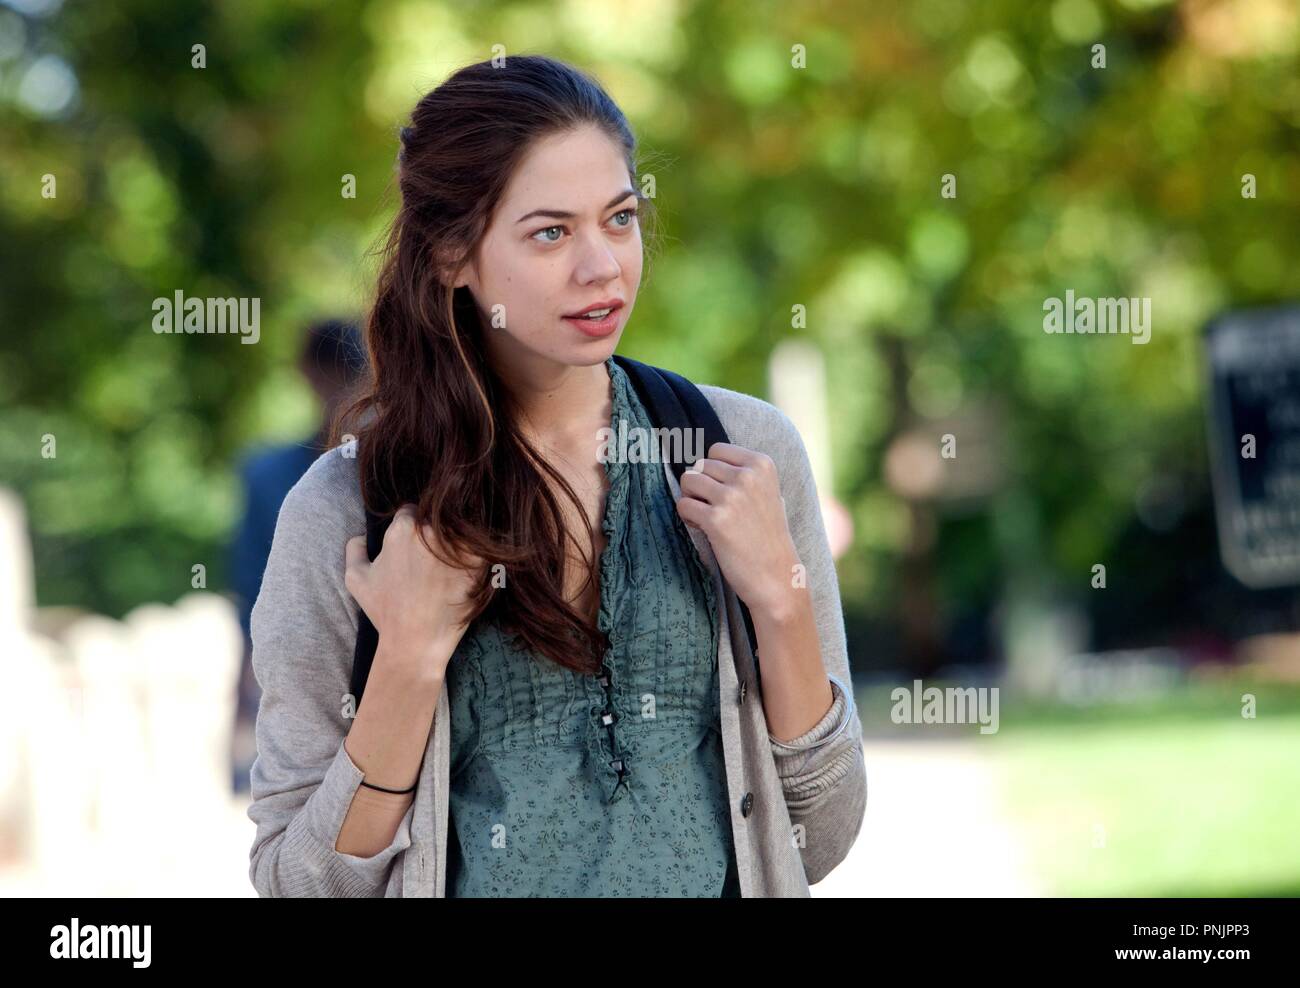 Original film title: DAMSELS IN DISTRESS. English title: DAMSELS IN DISTRESS. Year: 2011. Director: WHIT STILLMAN. Stars: ANALEIGH TIPTON. Credit: WESTERLY FILMS / BROWN, KERRY / Album Stock Photo